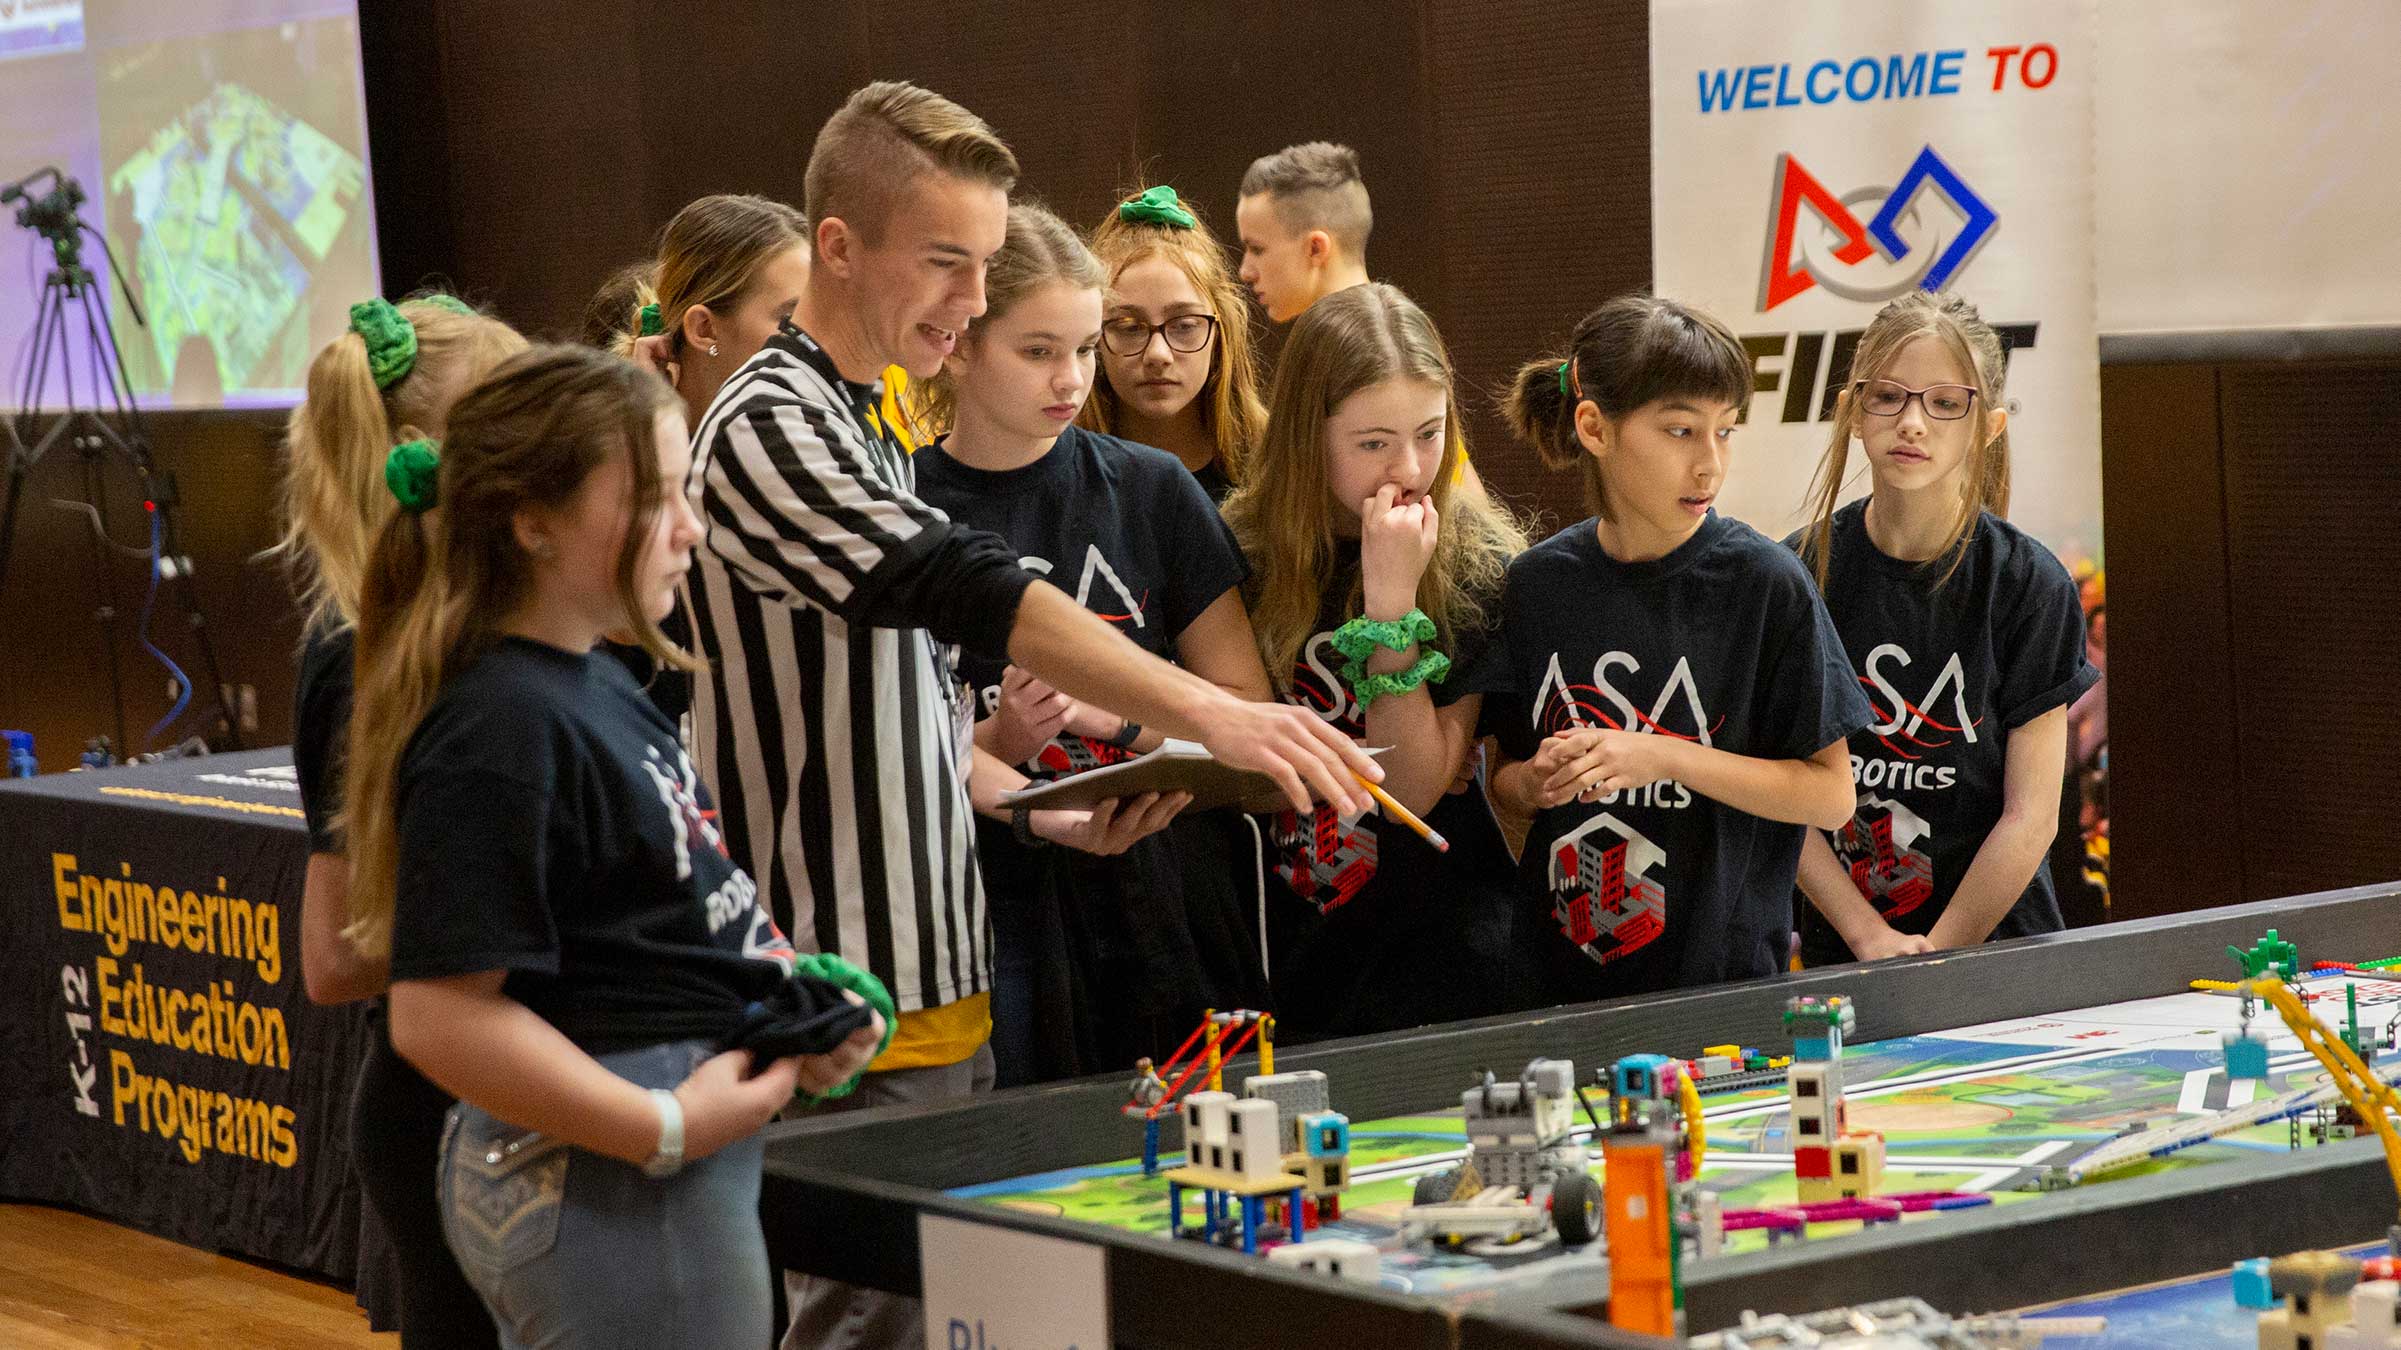 An ASU student volunteers as a judge at the FIRST LEGO League state championship. He discusses a project with the all-girls team.